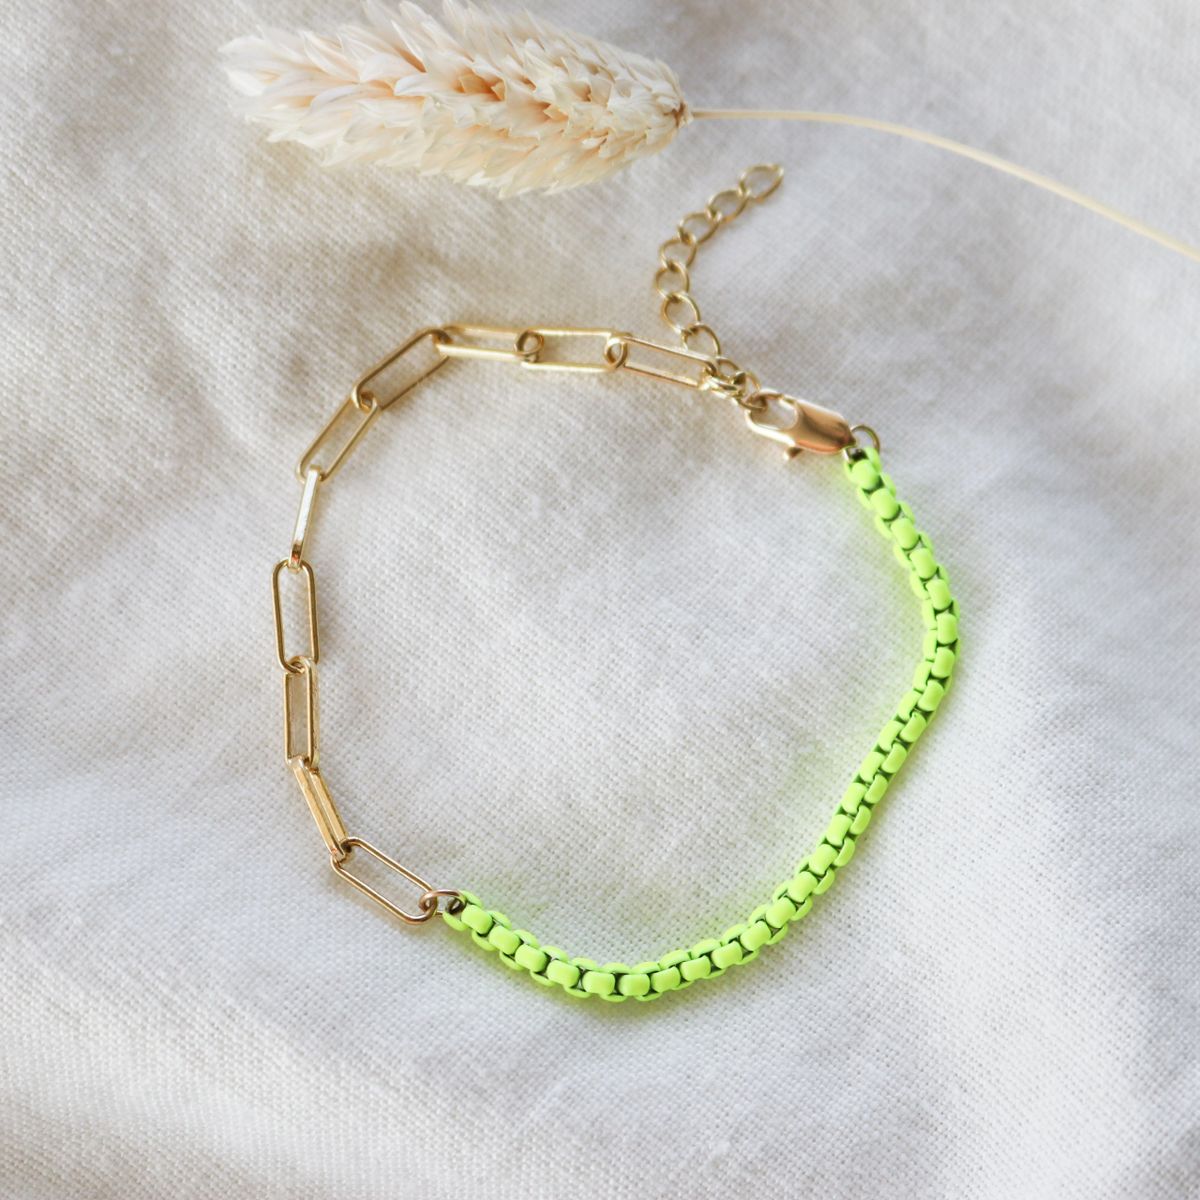 Mix Neon and paperclip Chain Bracelet